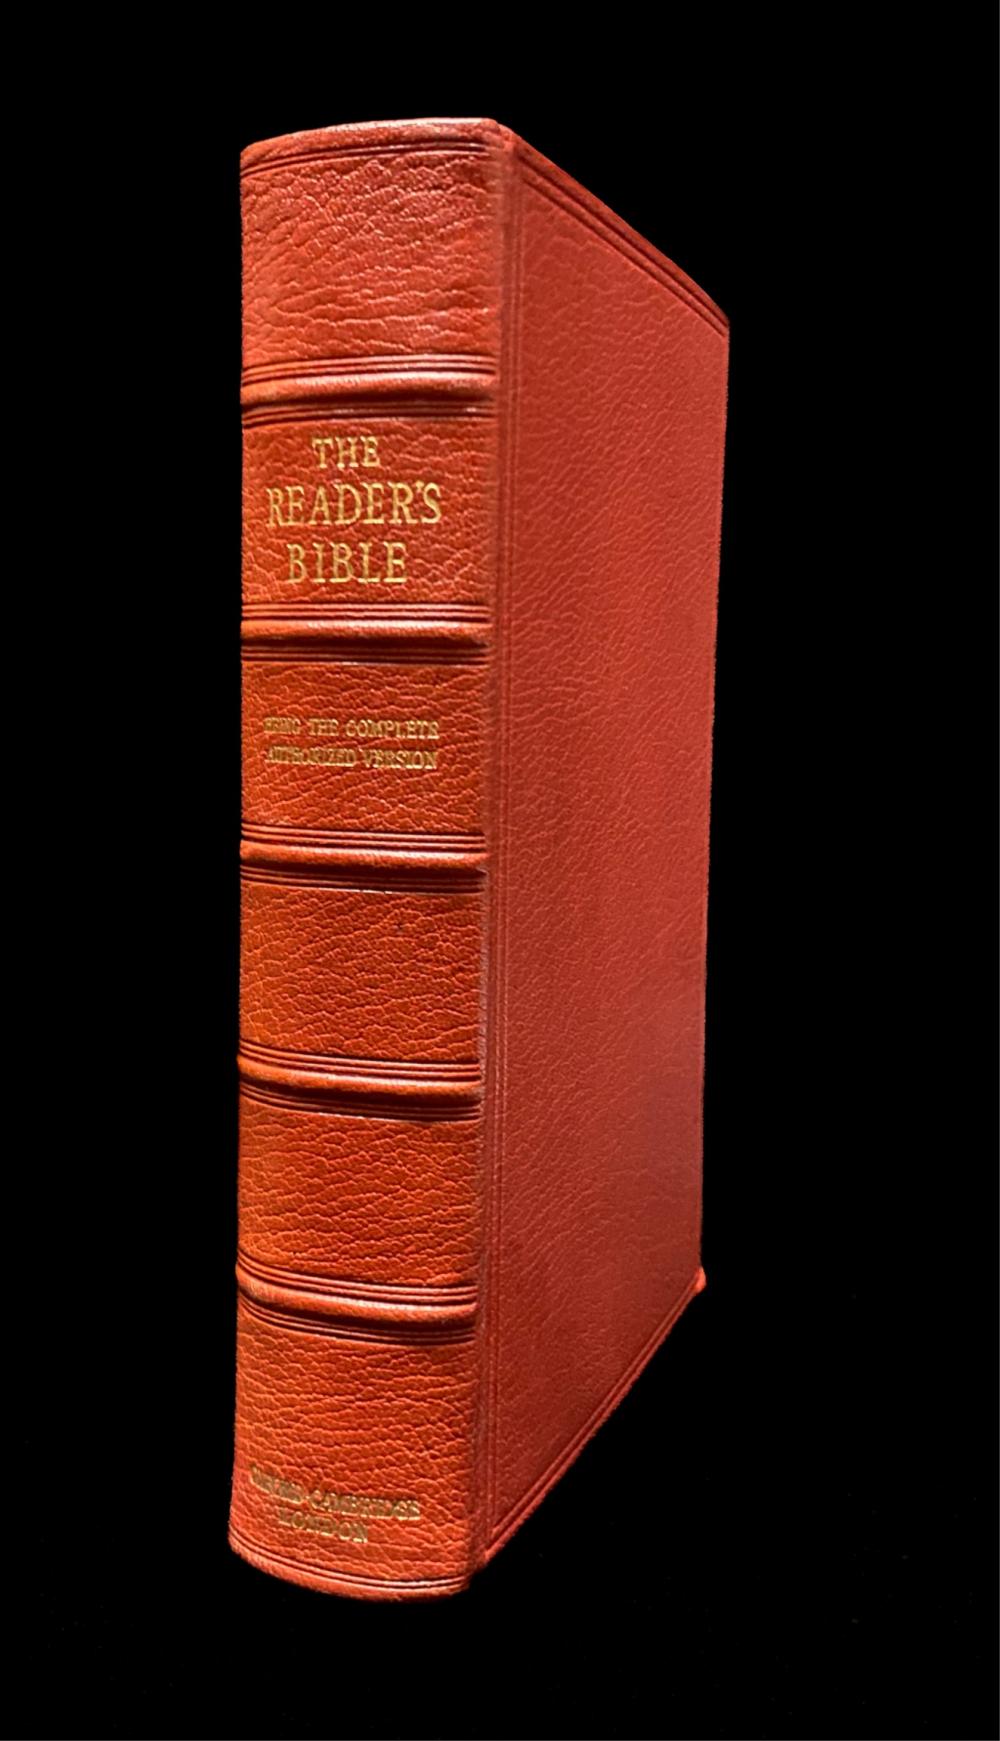 THE READER'S BIBLE, 1951The Reader's